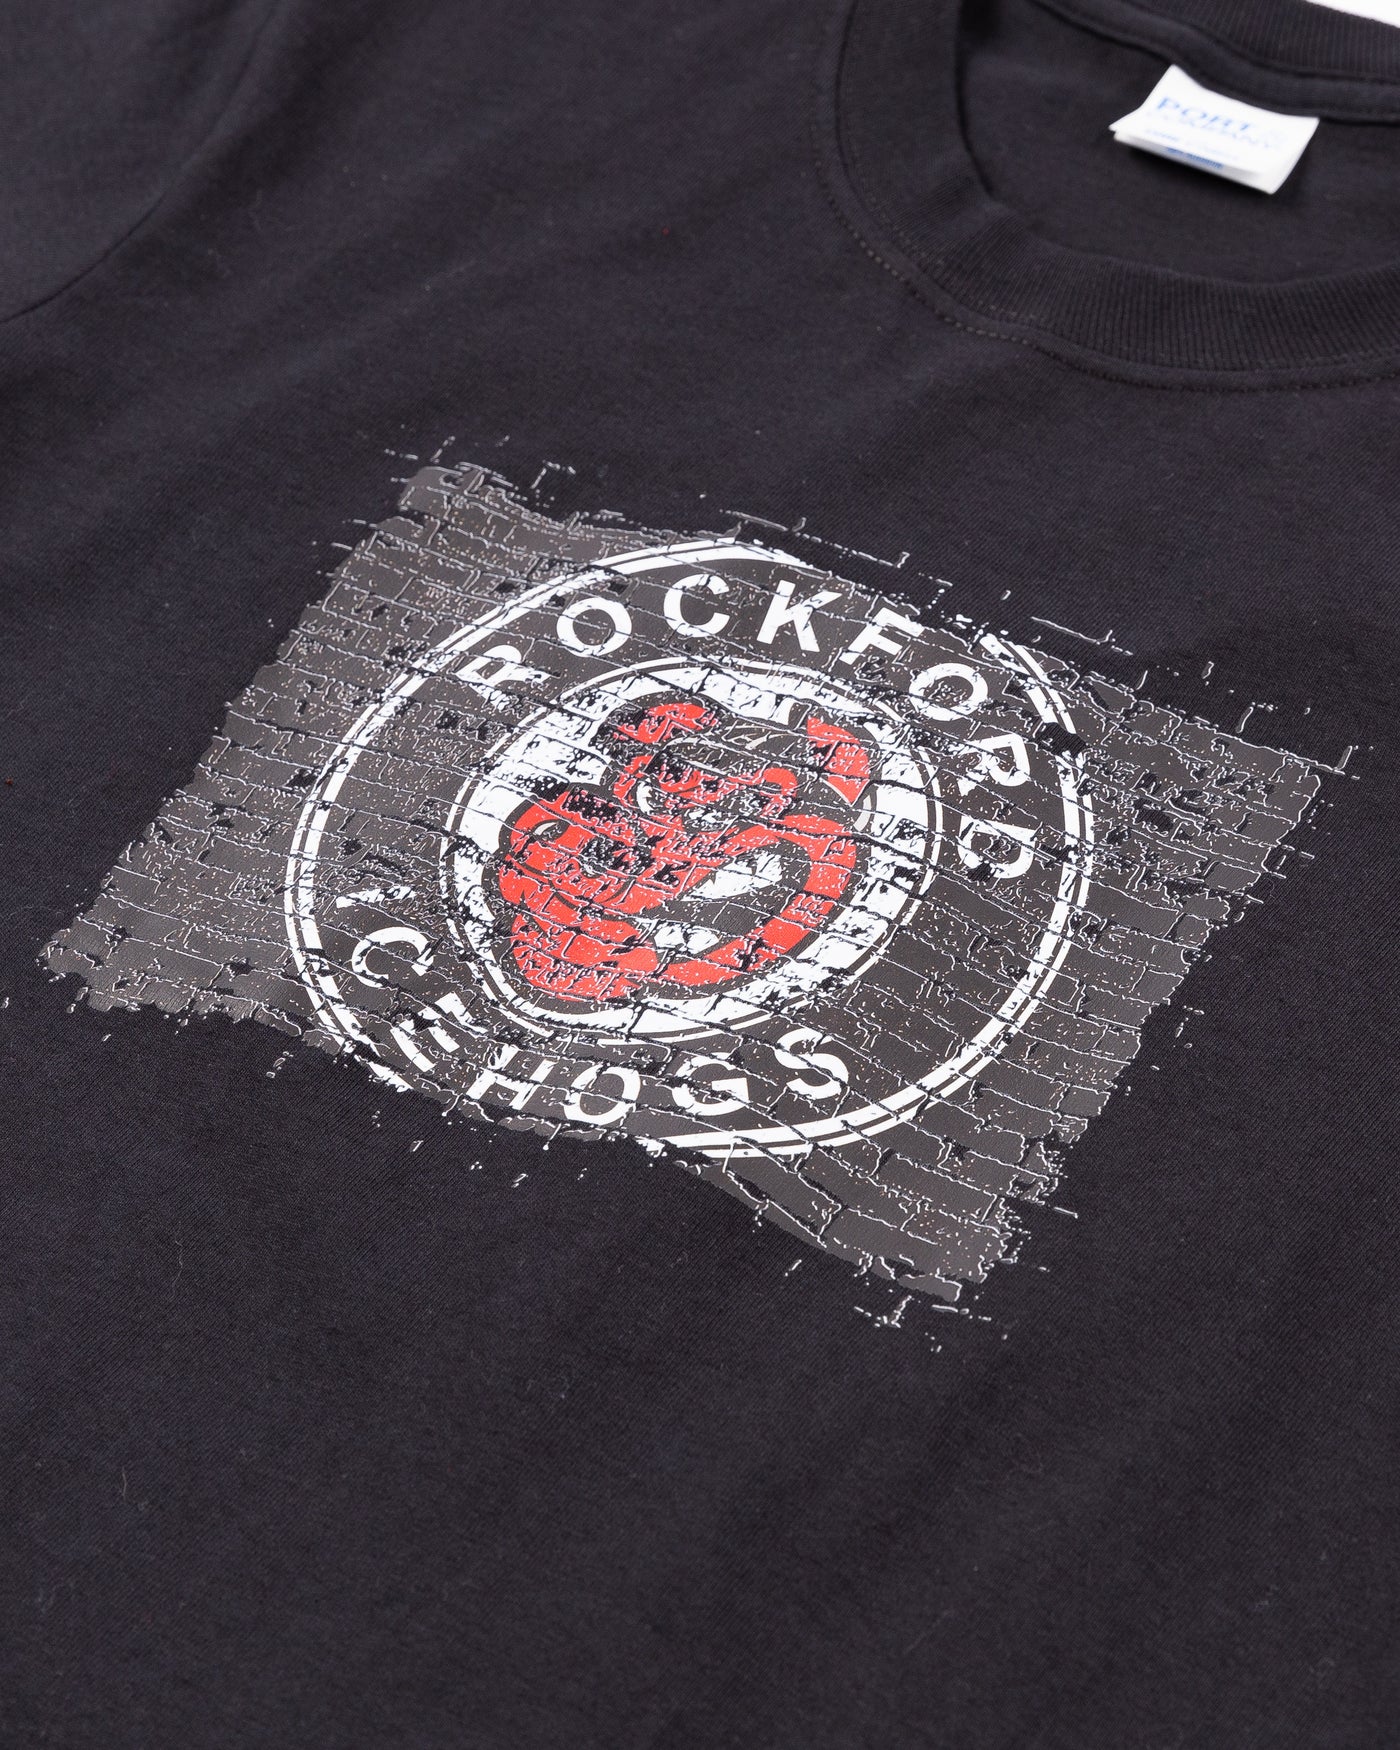 black youth tee with Rockford IceHogs brick art inspired graphic across front - detail lay flat